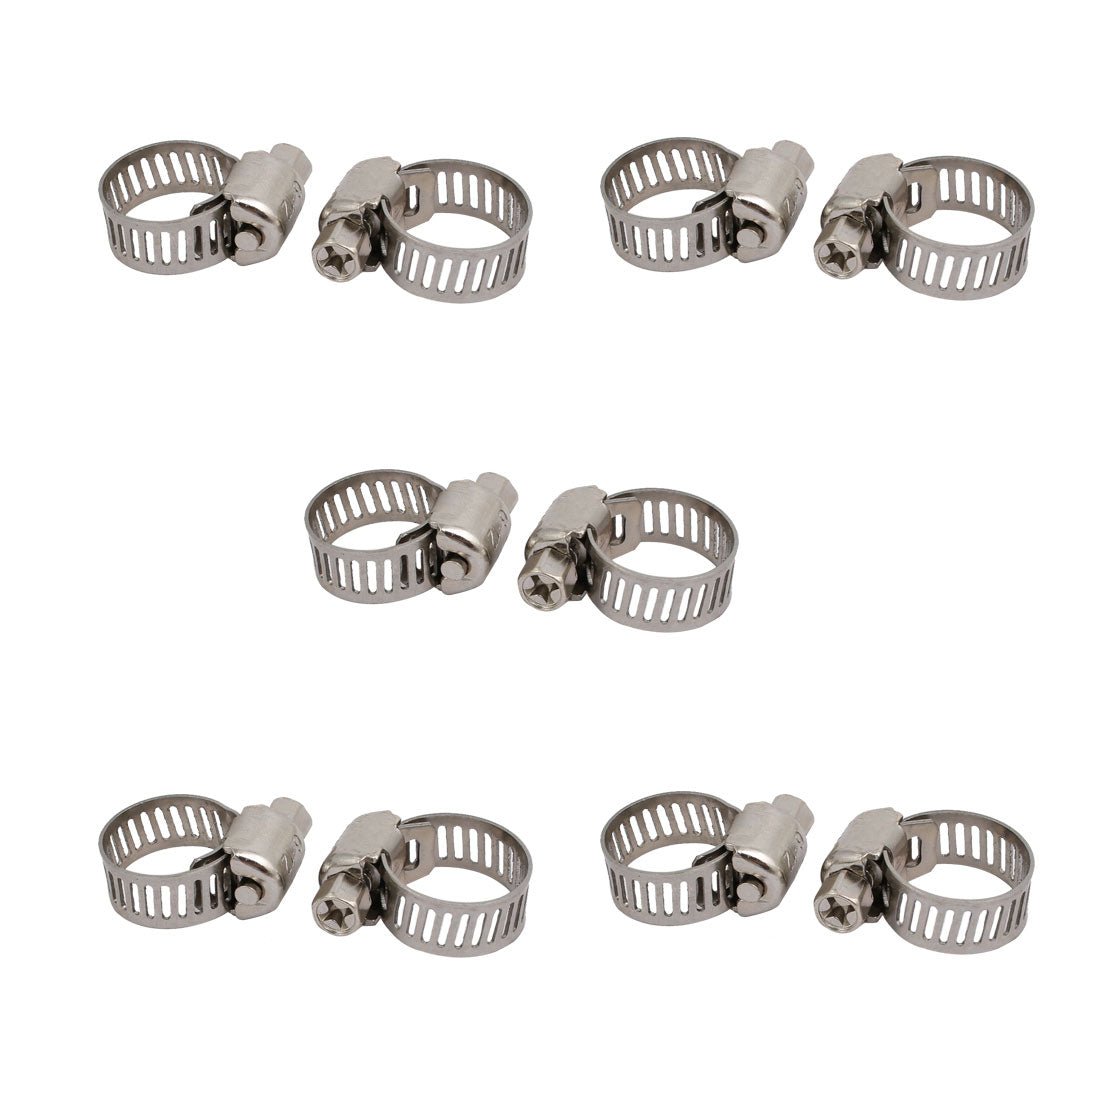 uxcell Uxcell 6-12mm Stainless Steel Adjustable  Gear Hose Clamps Silver Tone 10pcs